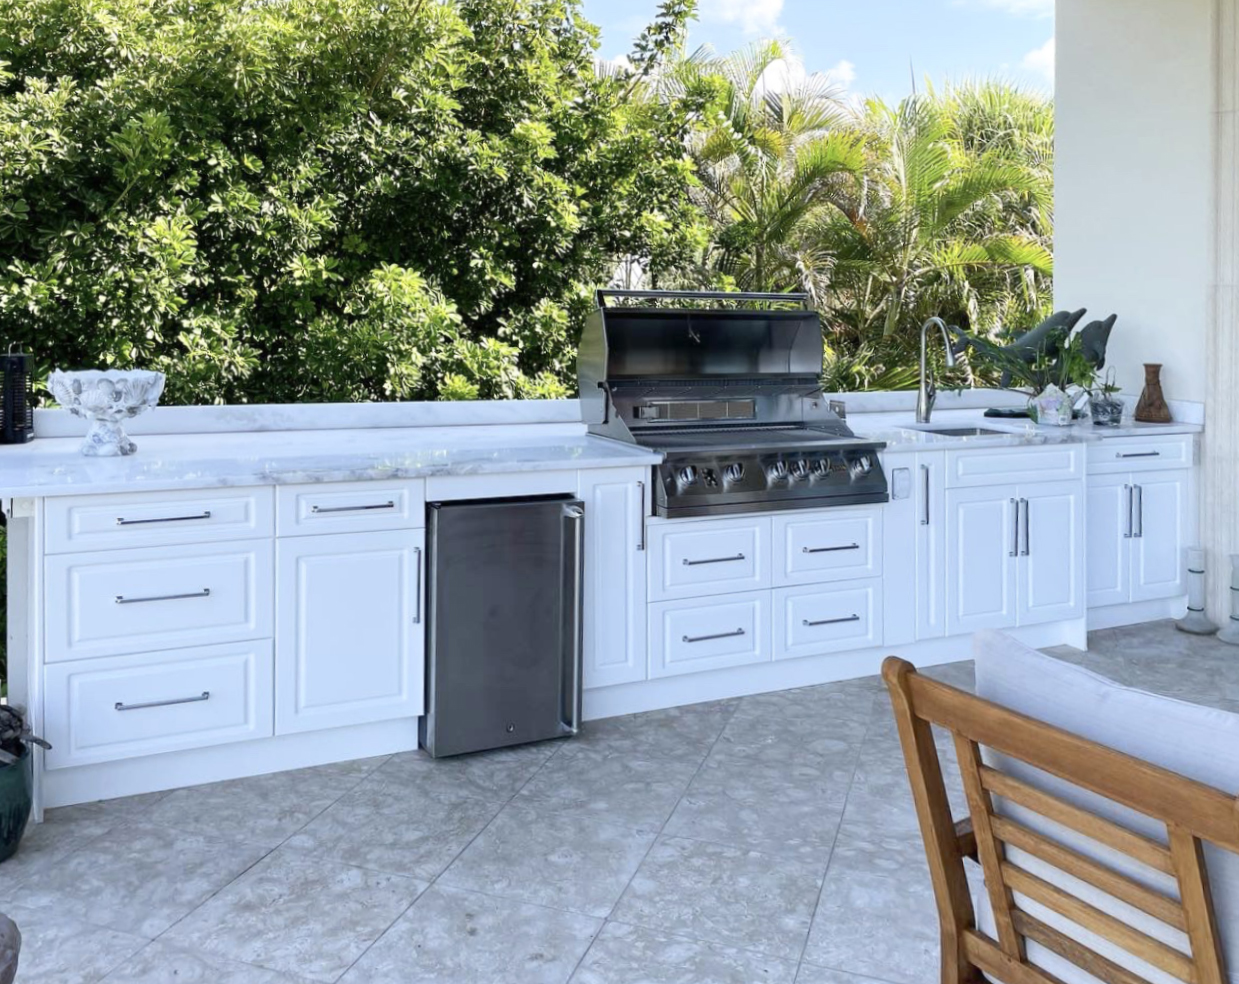 OUTDOOR KITCHEN 7. Custom outdoor kitchen in Casey Key, FL. Kitchen features white, coastal style cabinets. Appliances include Lion grill, stainless front refrigerator and stainless bar pulls.